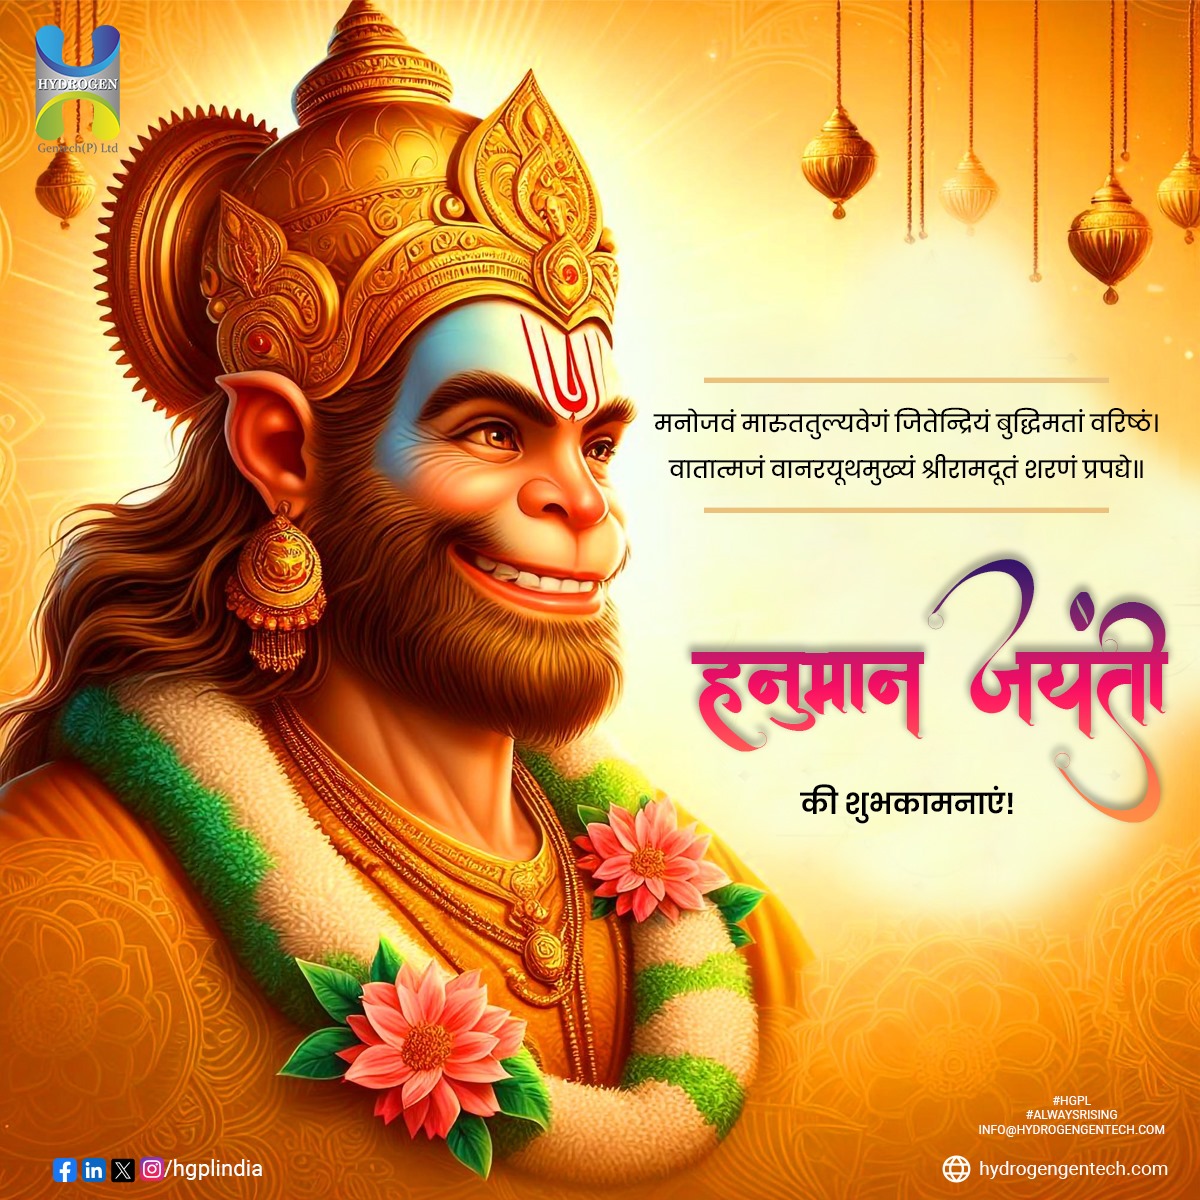 🙏 On the auspicious occasion of Hanuman Jayanti, let's draw inspiration from the unwavering devotion, strength, and courage of Lord Hanuman. May his divine presence fill your heart with love, courage, and wisdom. Wishing you and your loved ones a blessed Hanuman Jayanti! 🕉️🌟